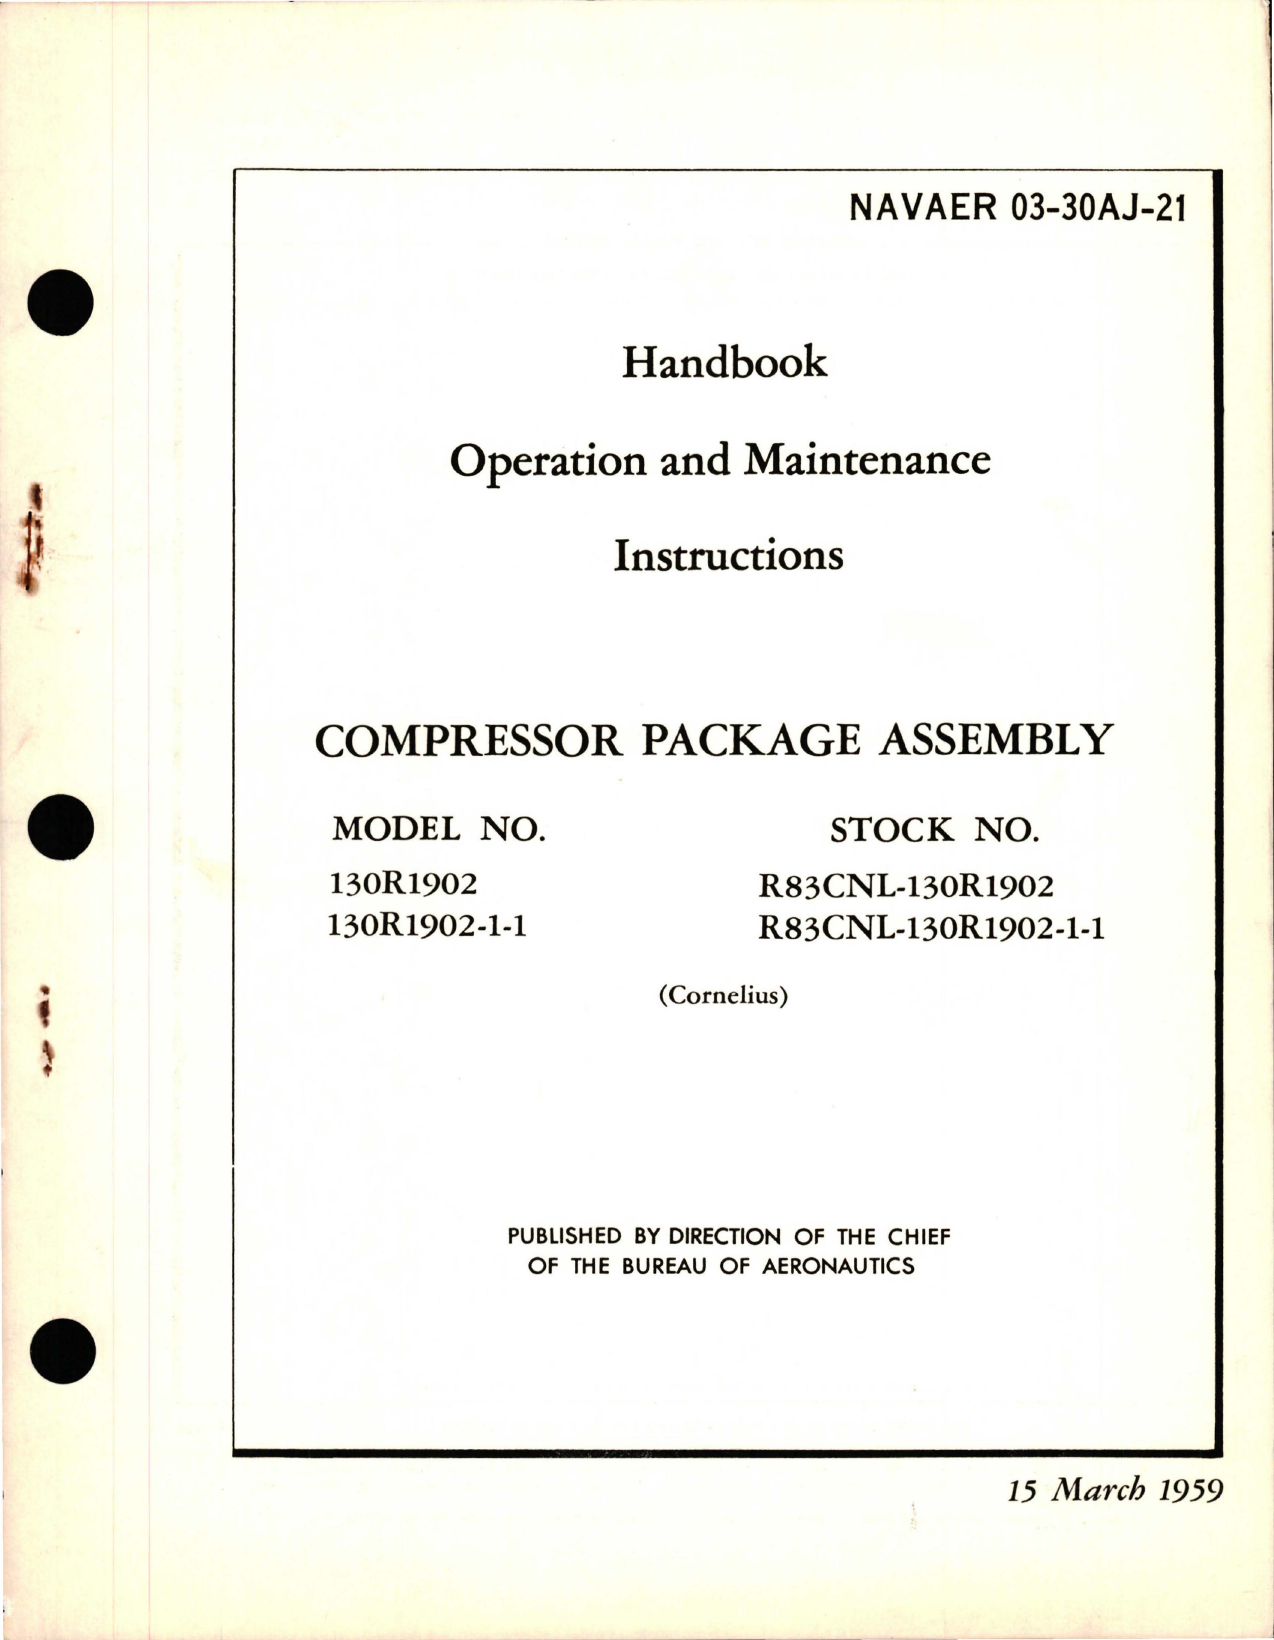 Sample page 1 from AirCorps Library document: Operation and Maintenance Instructions for Compressor Package Assembly - Models 130R1902 and 130R1902-1-1